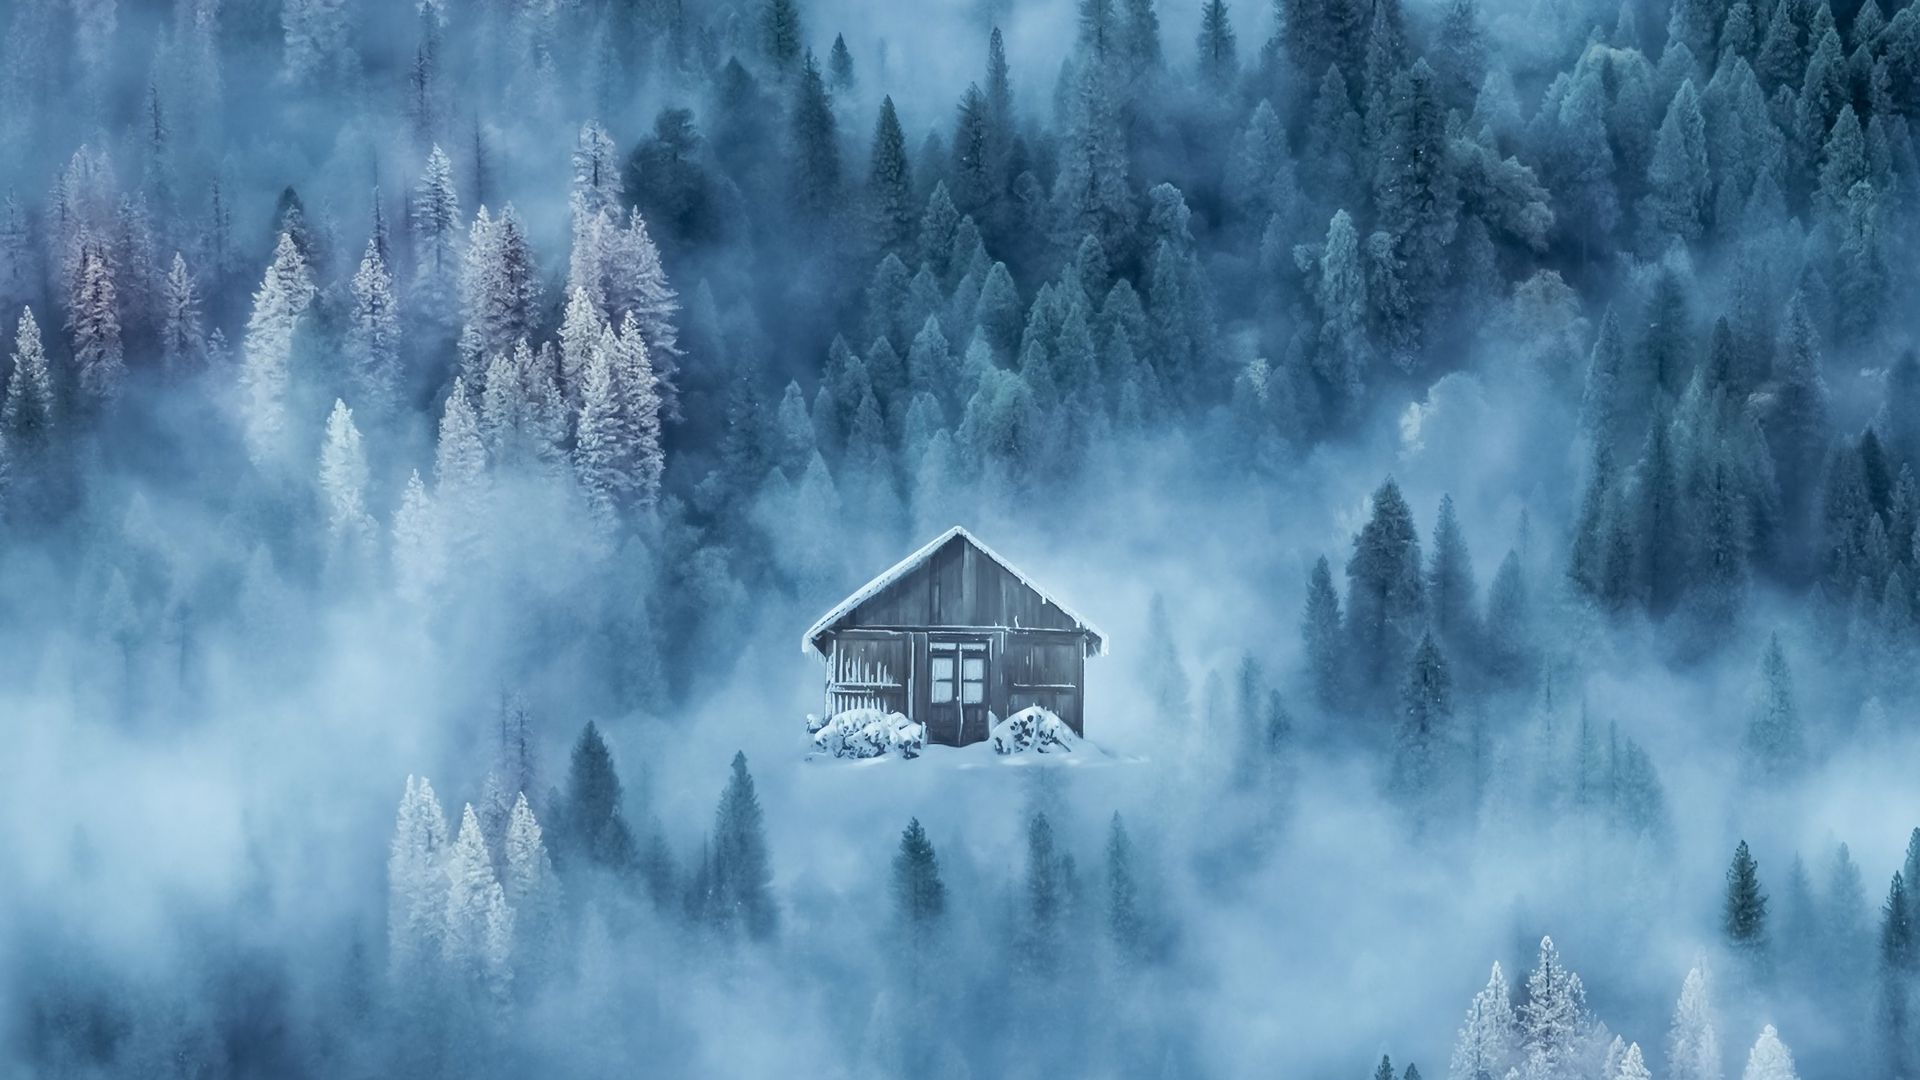 Download wallpaper 1920x1080 house, fog, snow, winter, forest full hd, hdtv, fhd, 1080p HD background